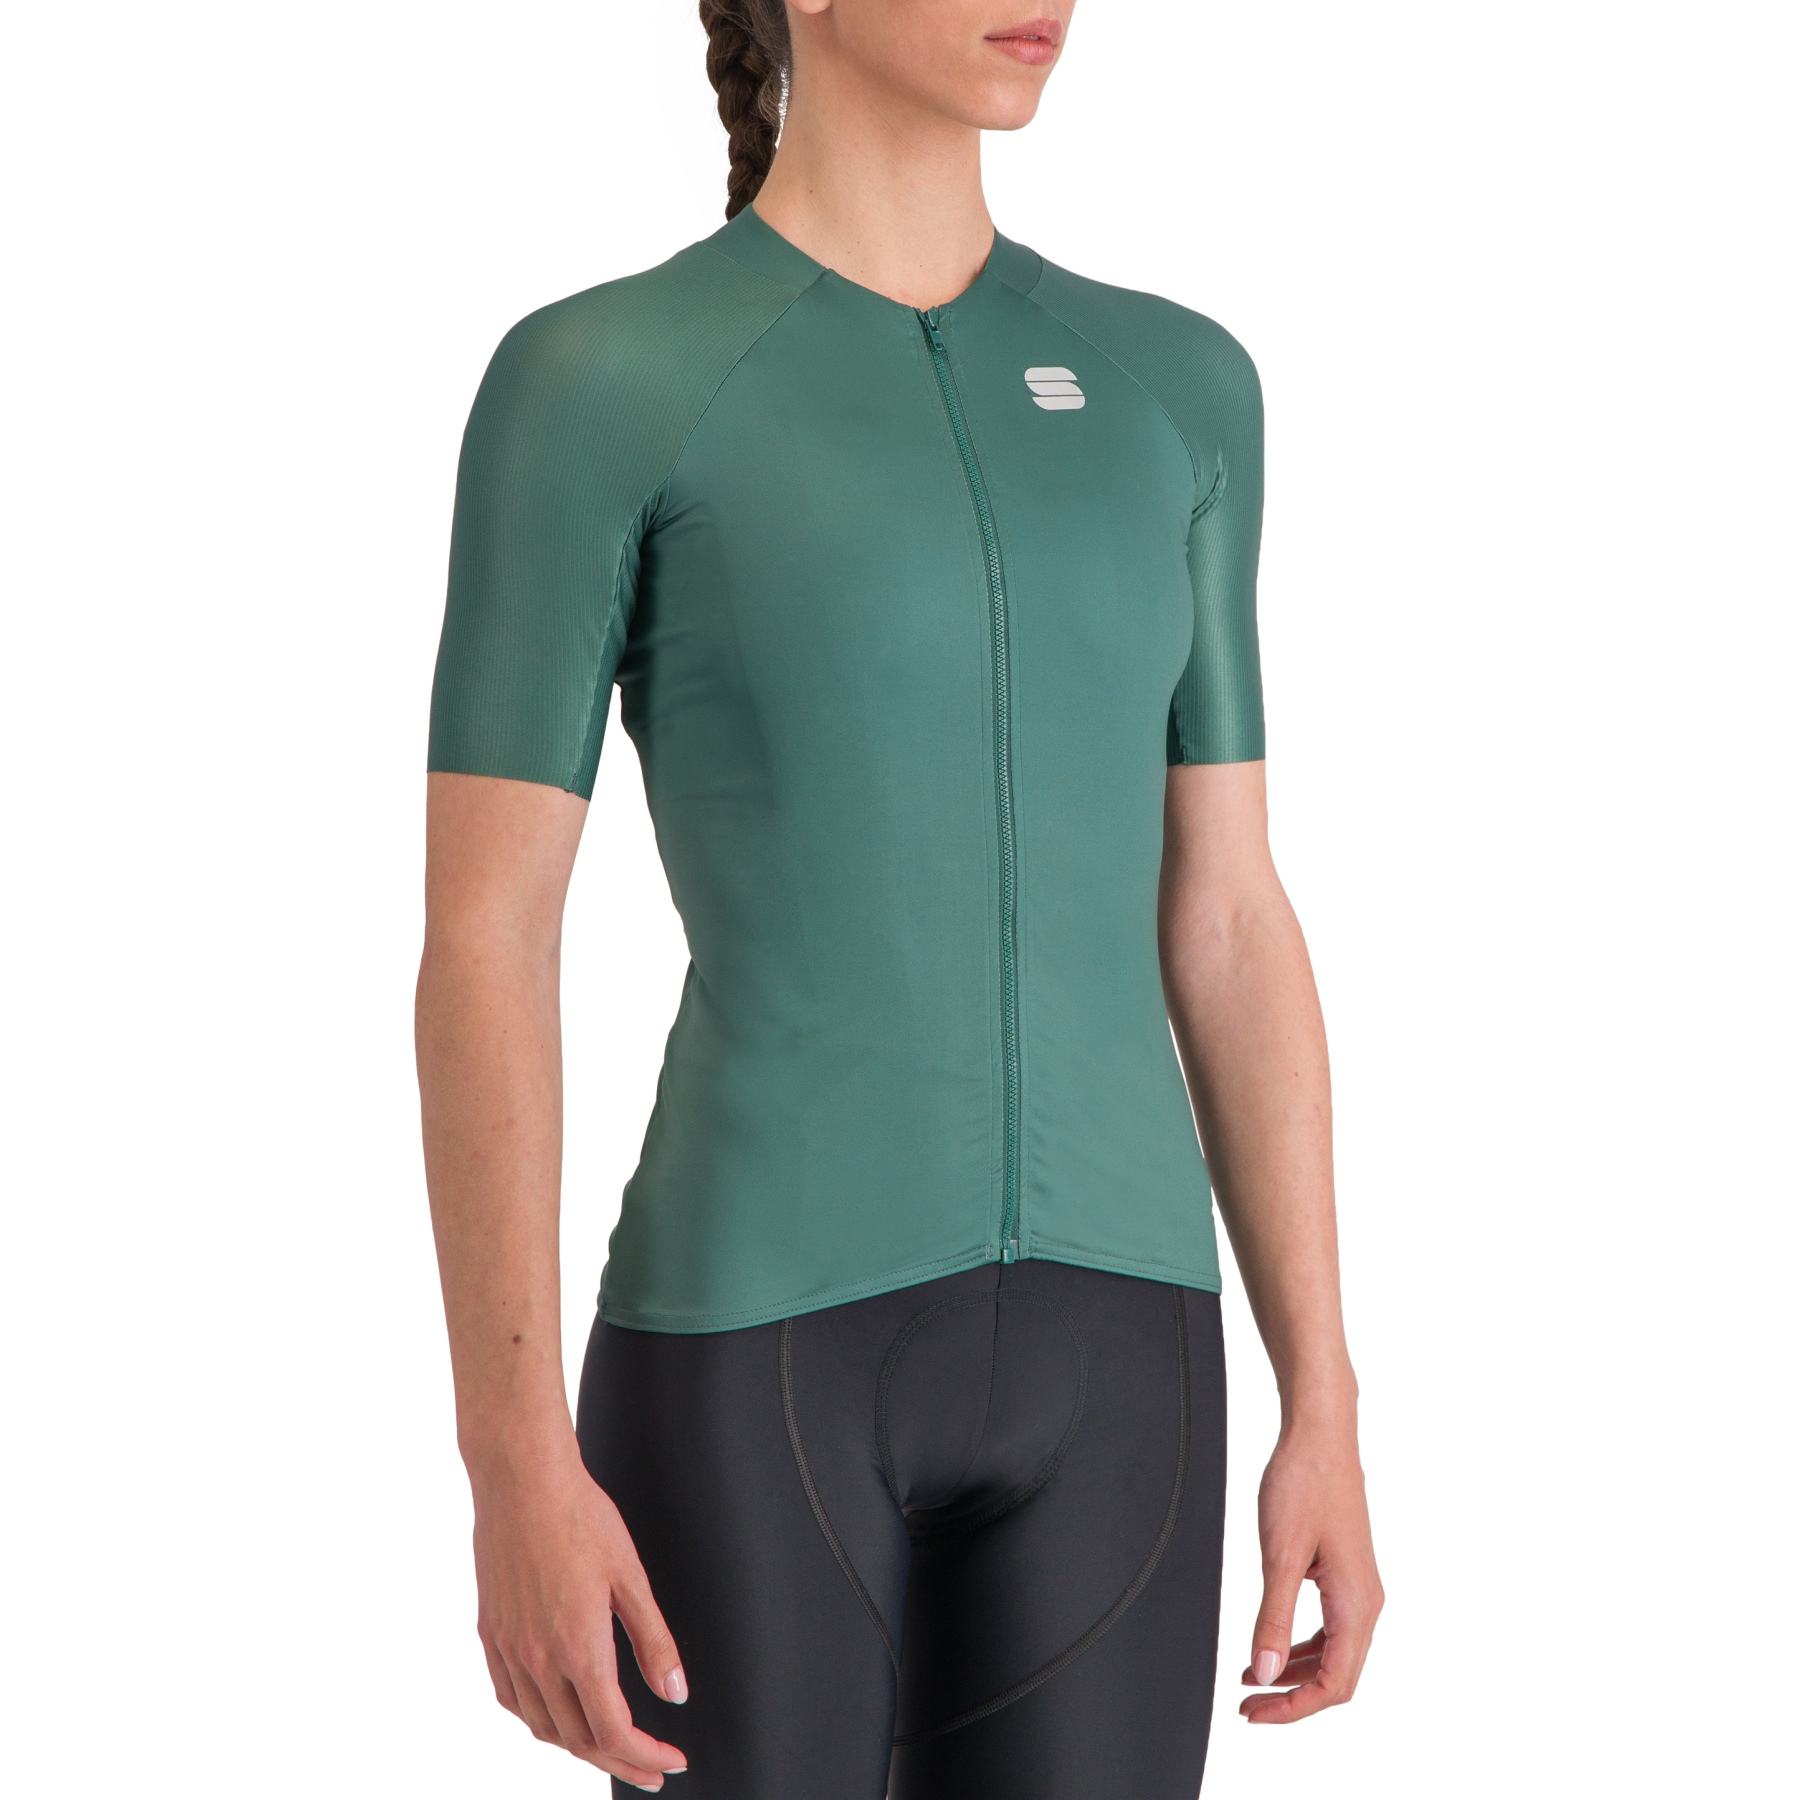 Picture of Sportful Matchy Short Sleeve Jersey Women - 3000 Shrub Green